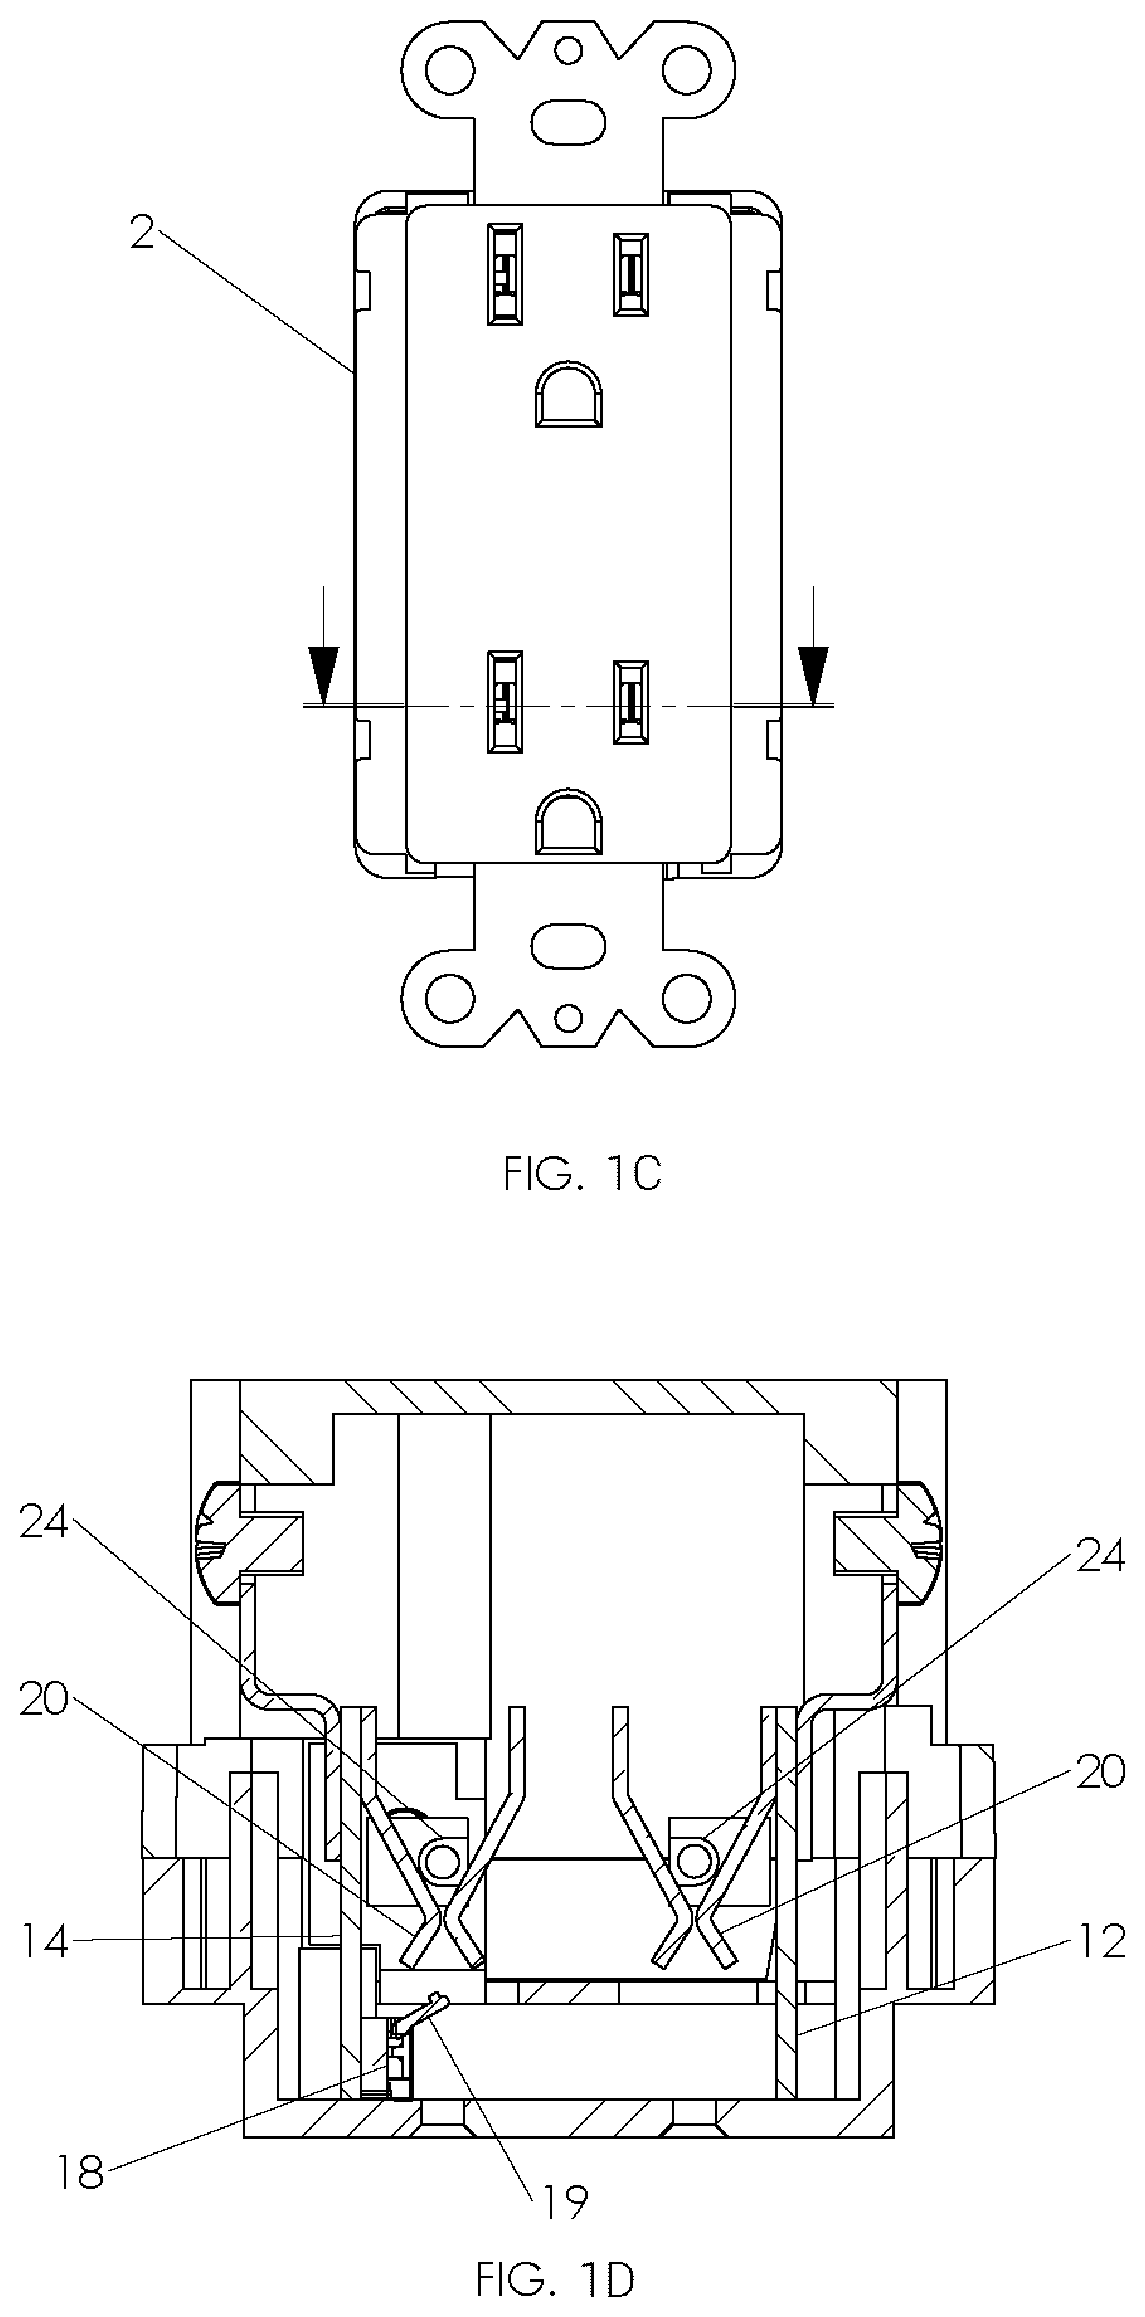 Systems and methods using electrical receptacles for integrated power control, communication and monitoring over at least one power line